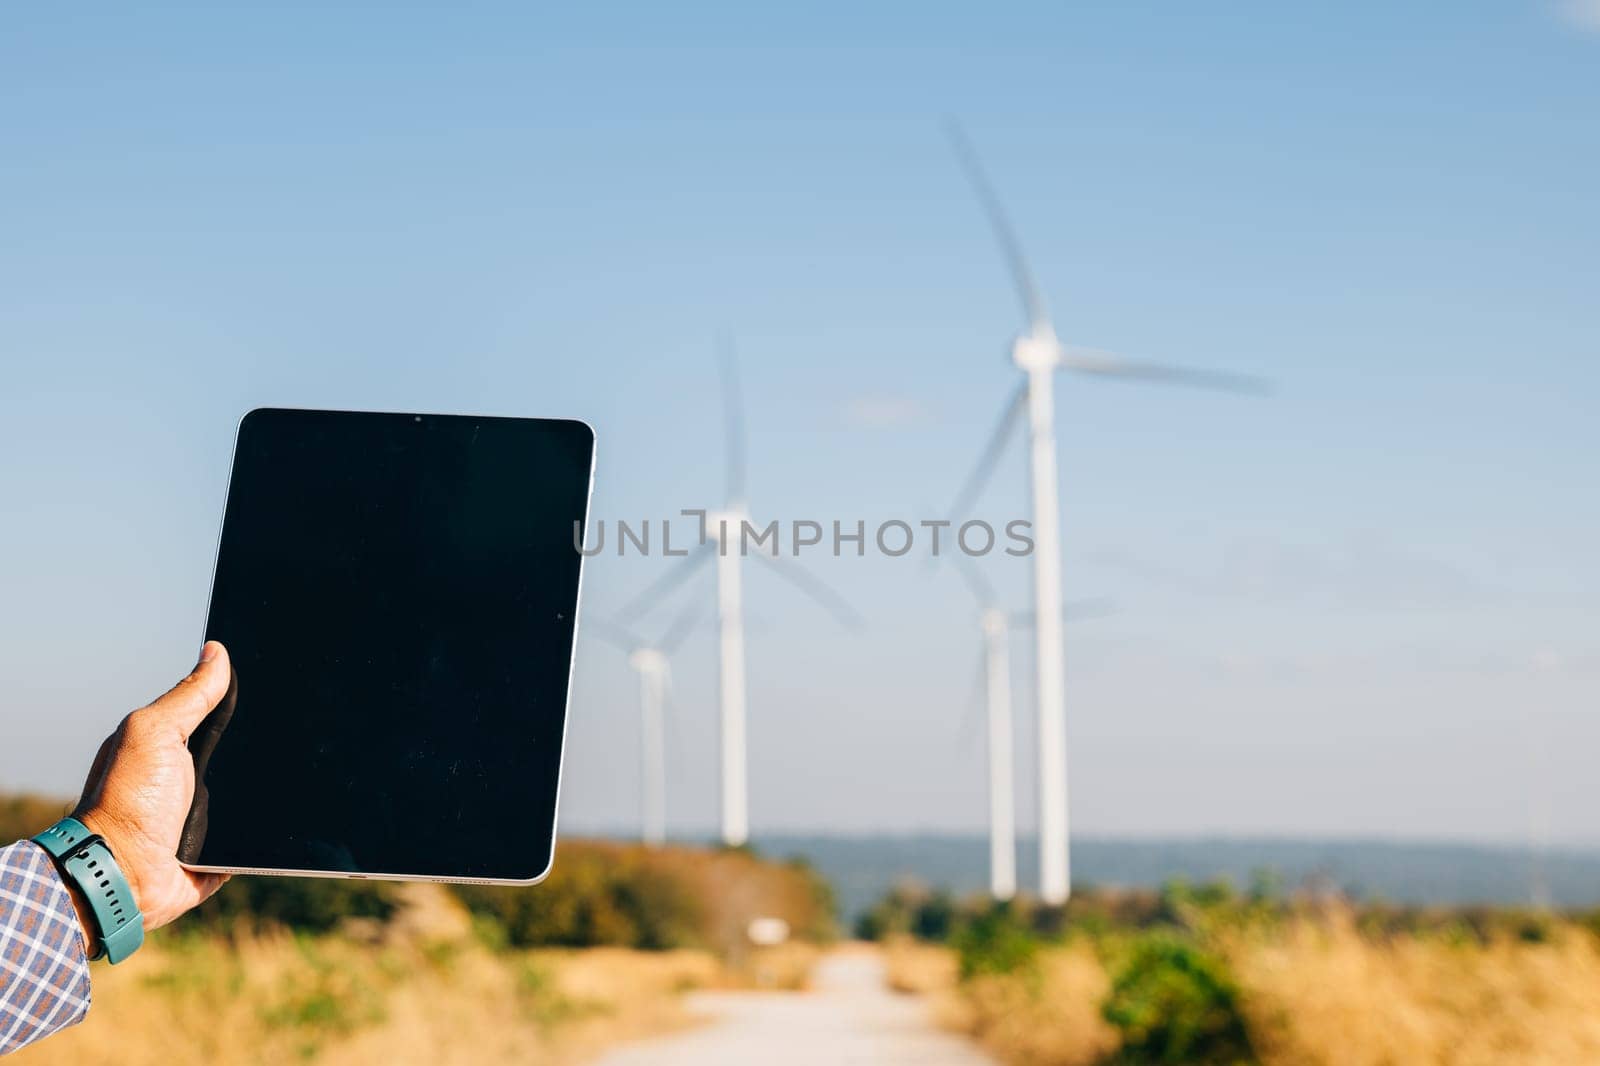 Engineer with tablet at windmill farm by Sorapop